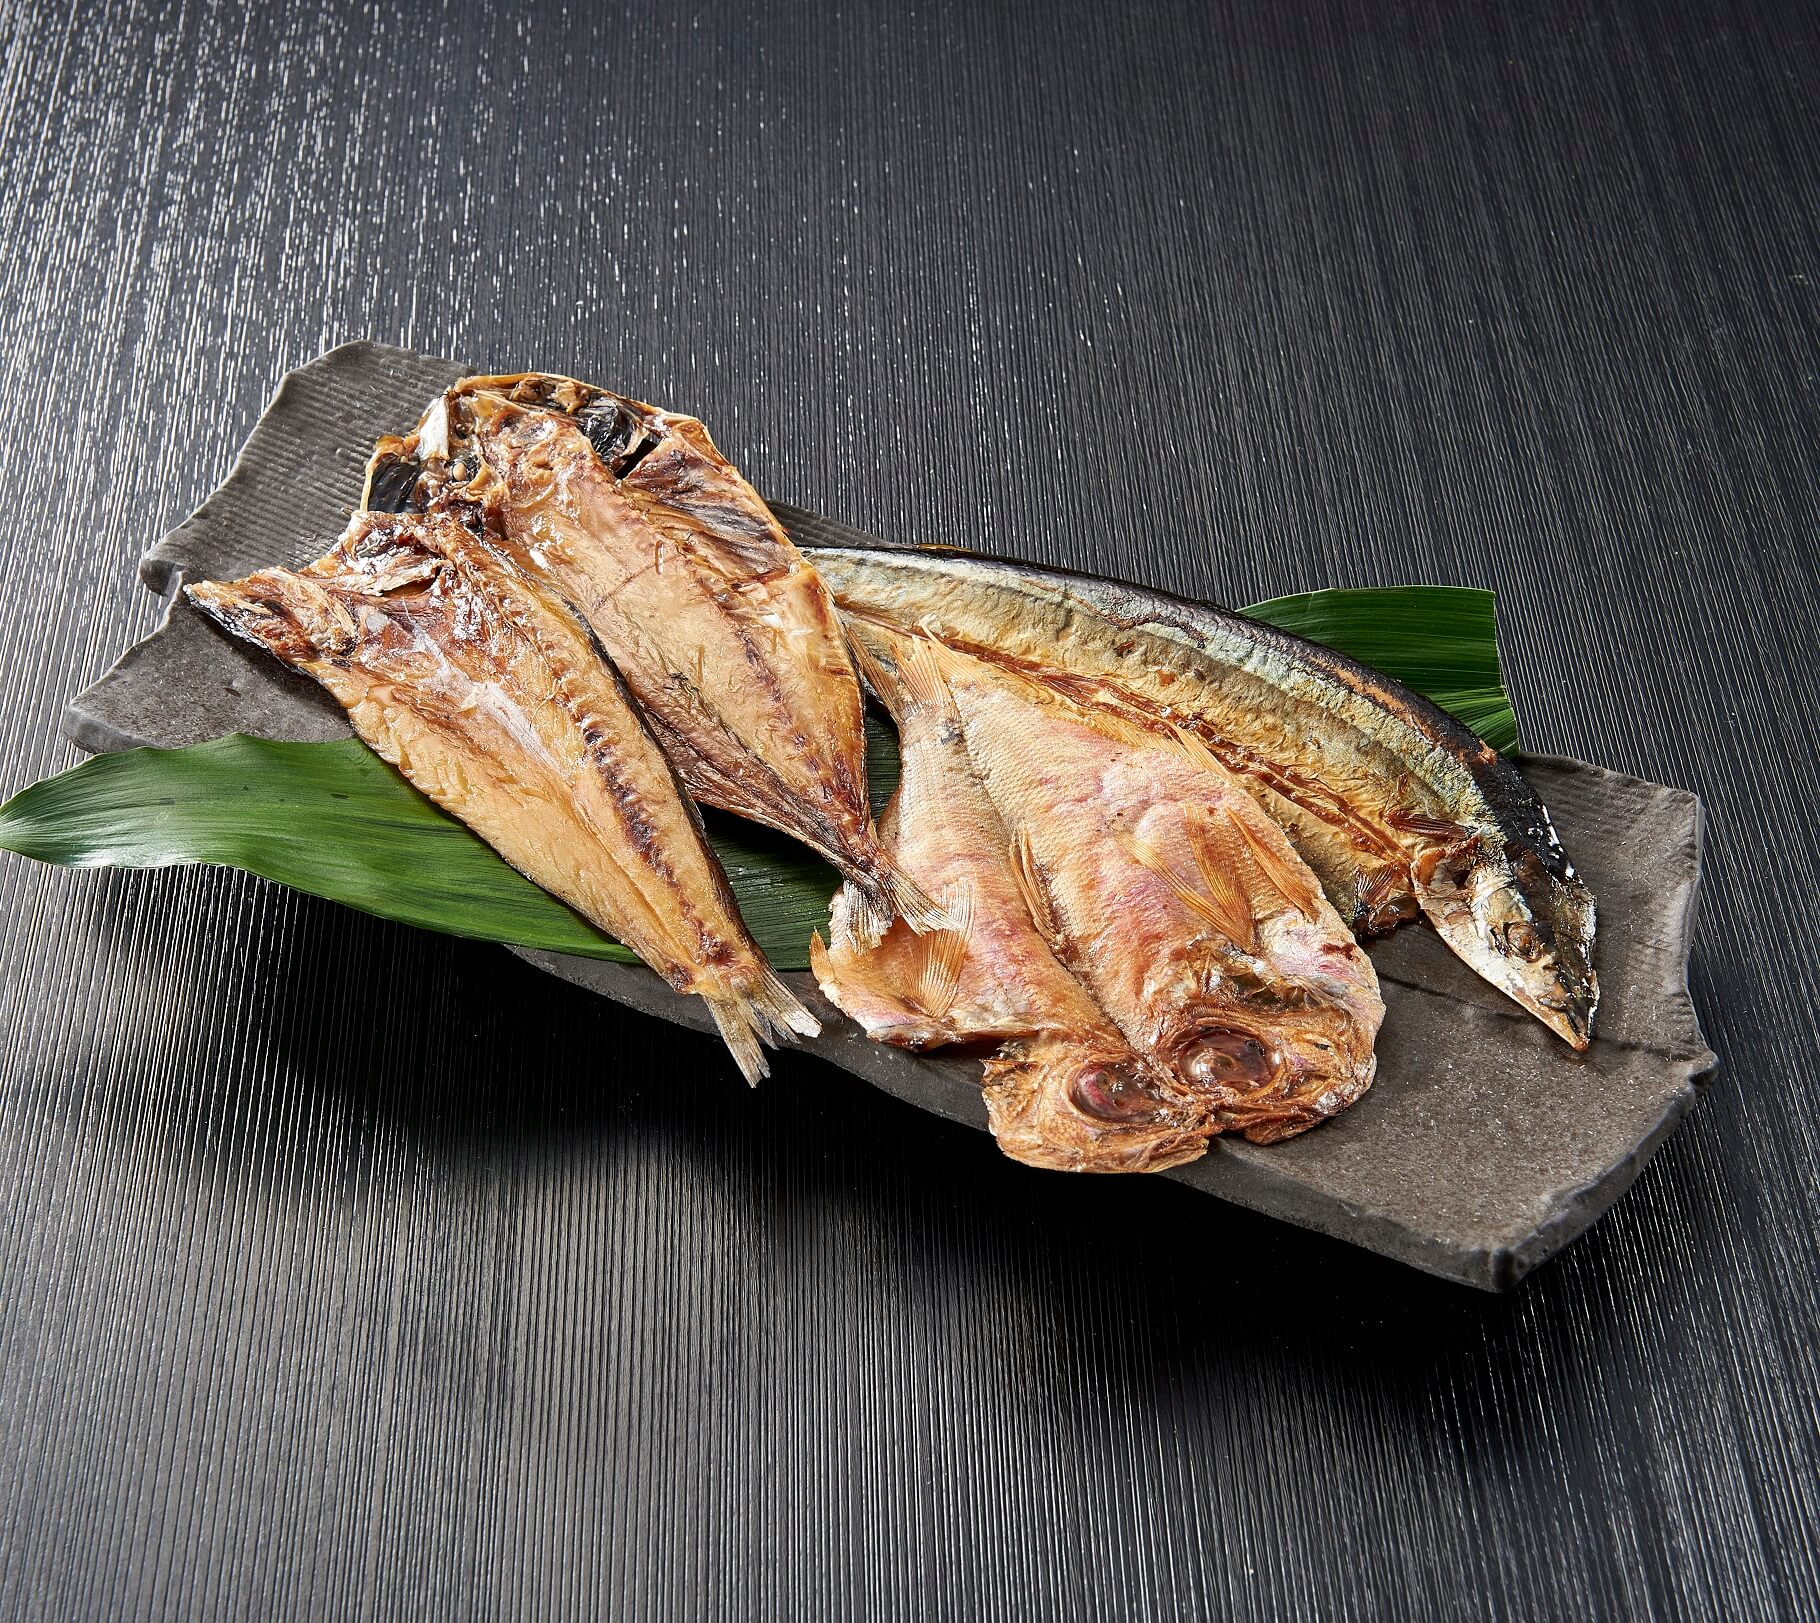 Grilled fish that you can even eat the bones Aji-mail